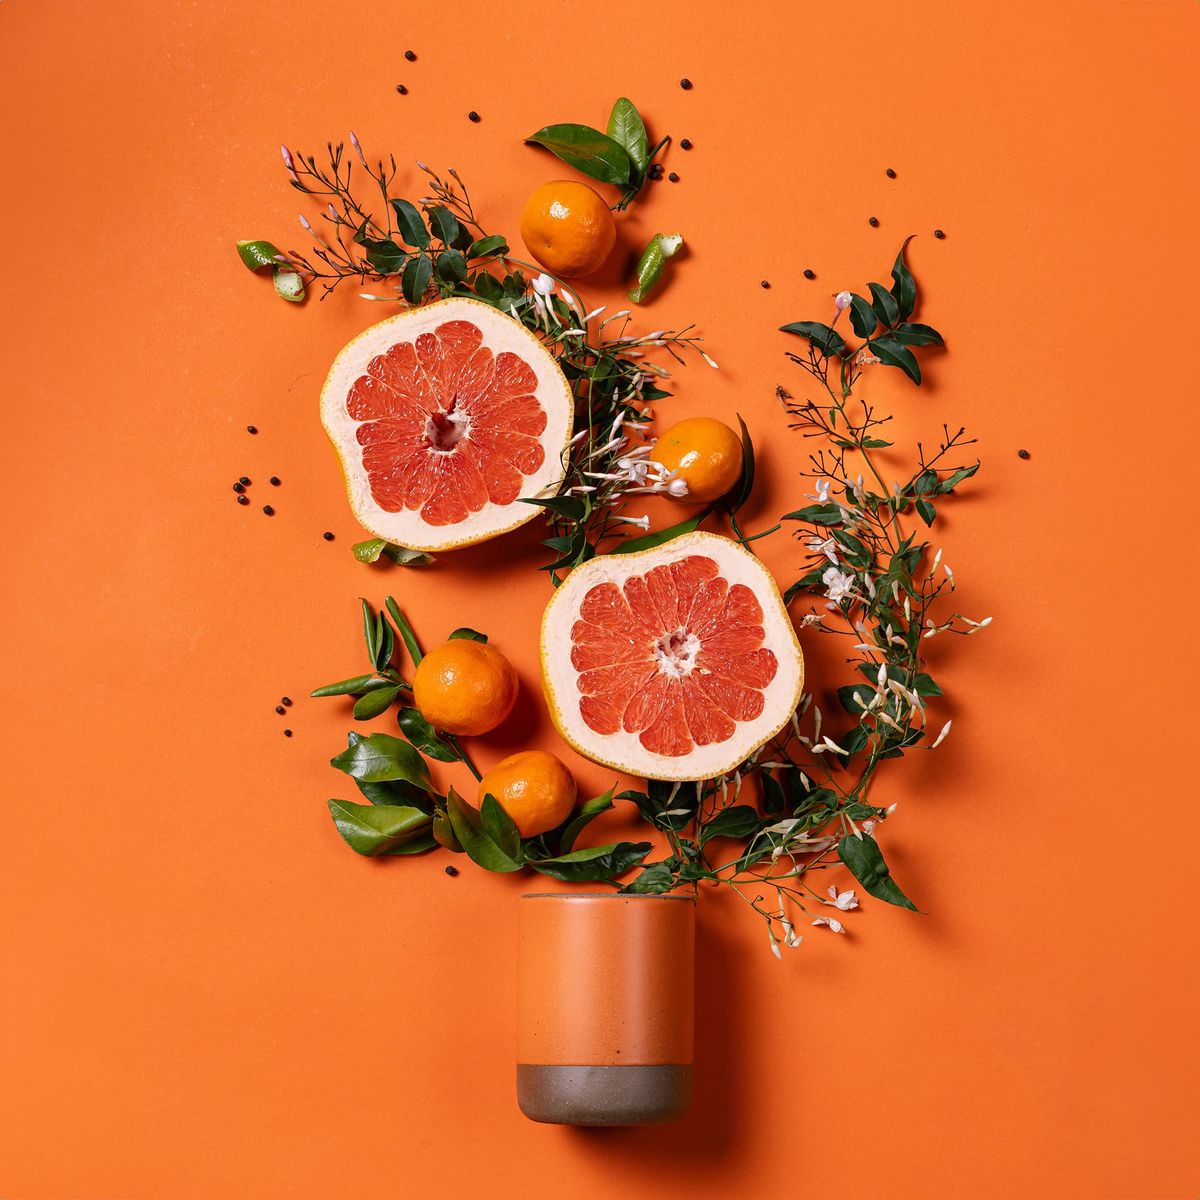 A cylindrical ceramic vessel in a bold orange color laying on its side - sliced grapefruits, oranges, and greenery are artfully styled coming out of the top of the candle to reflect the scent..